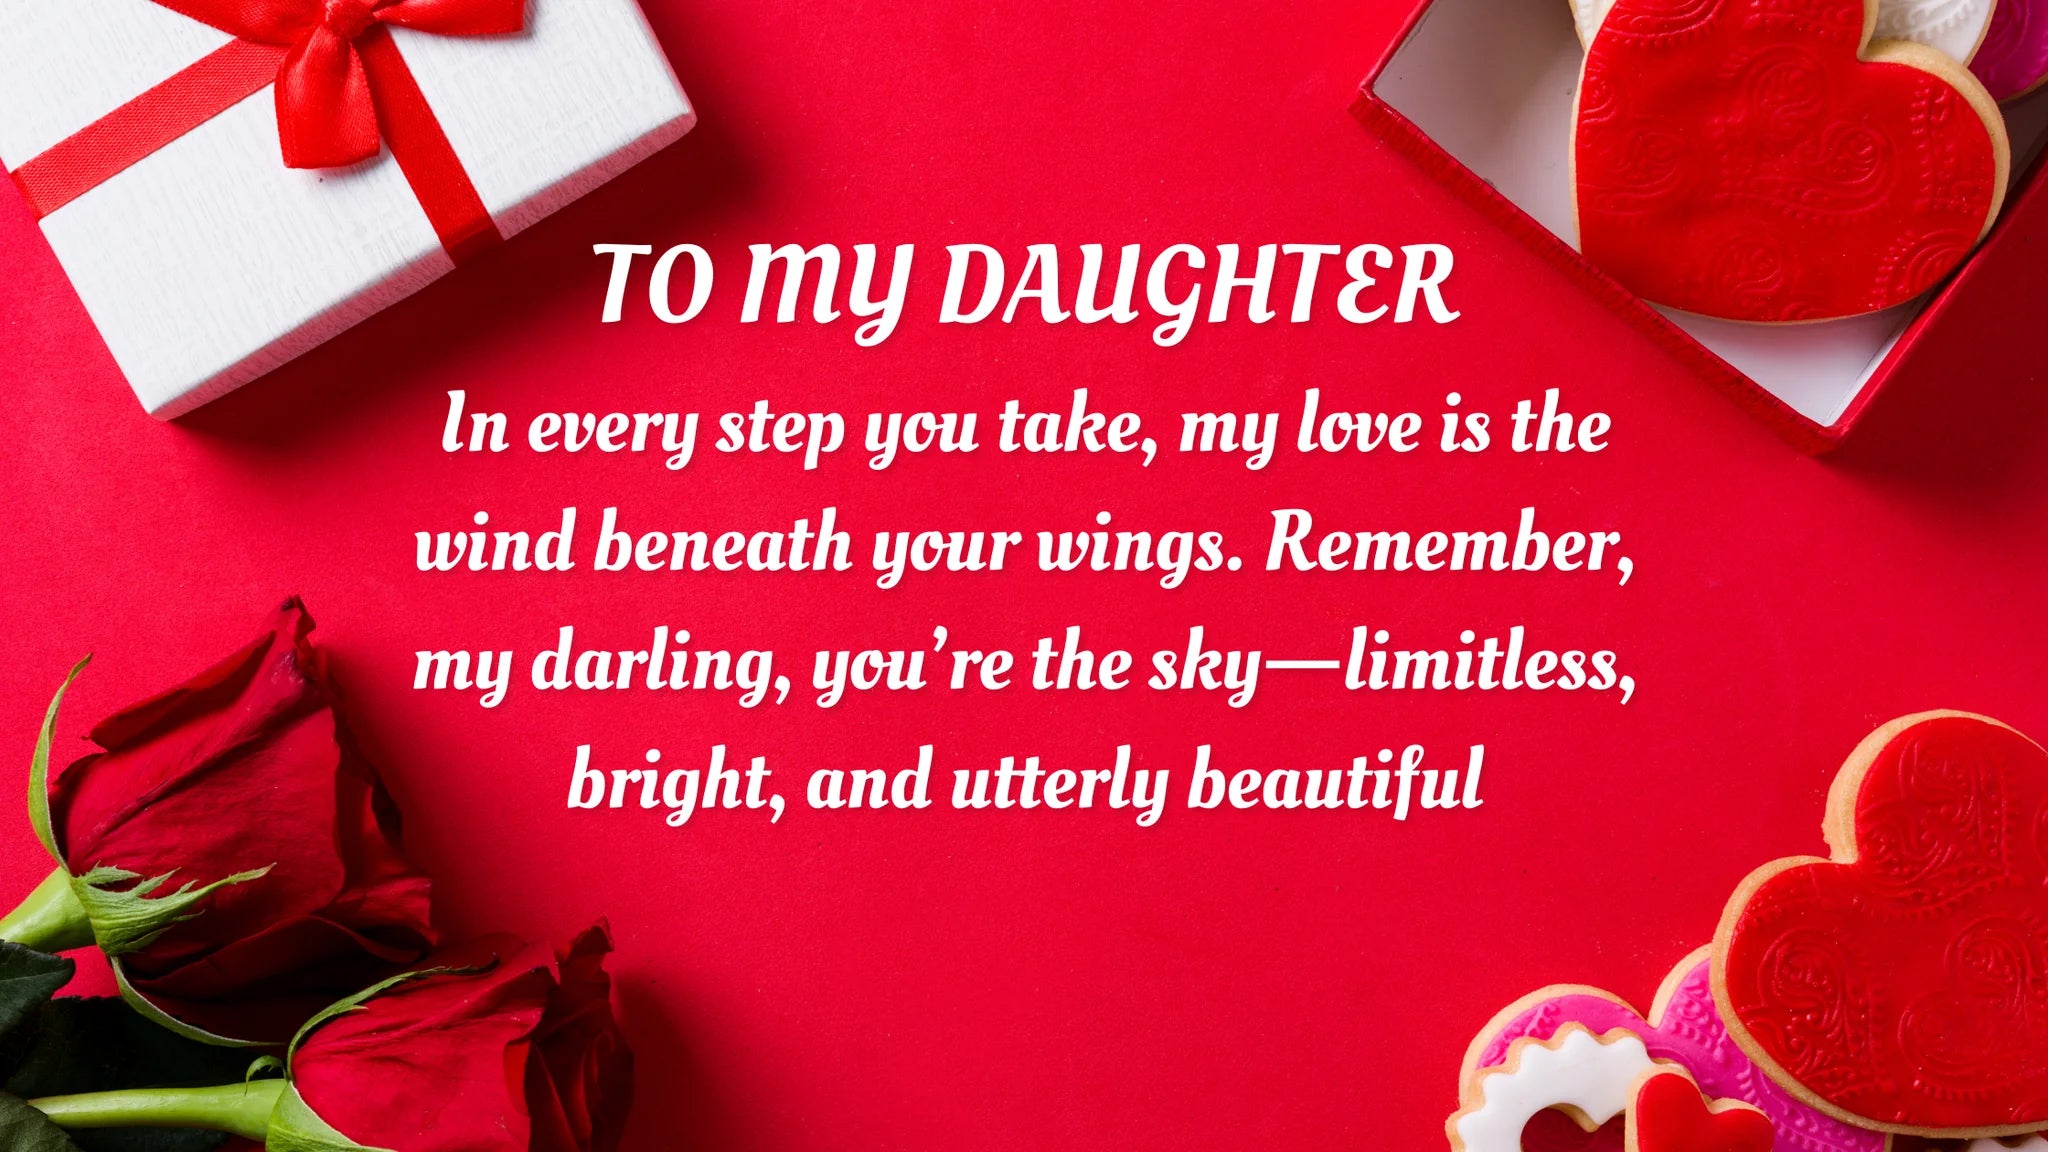 10 Heartfelt Messages: A Mother's Timeless Love for Her Daughter